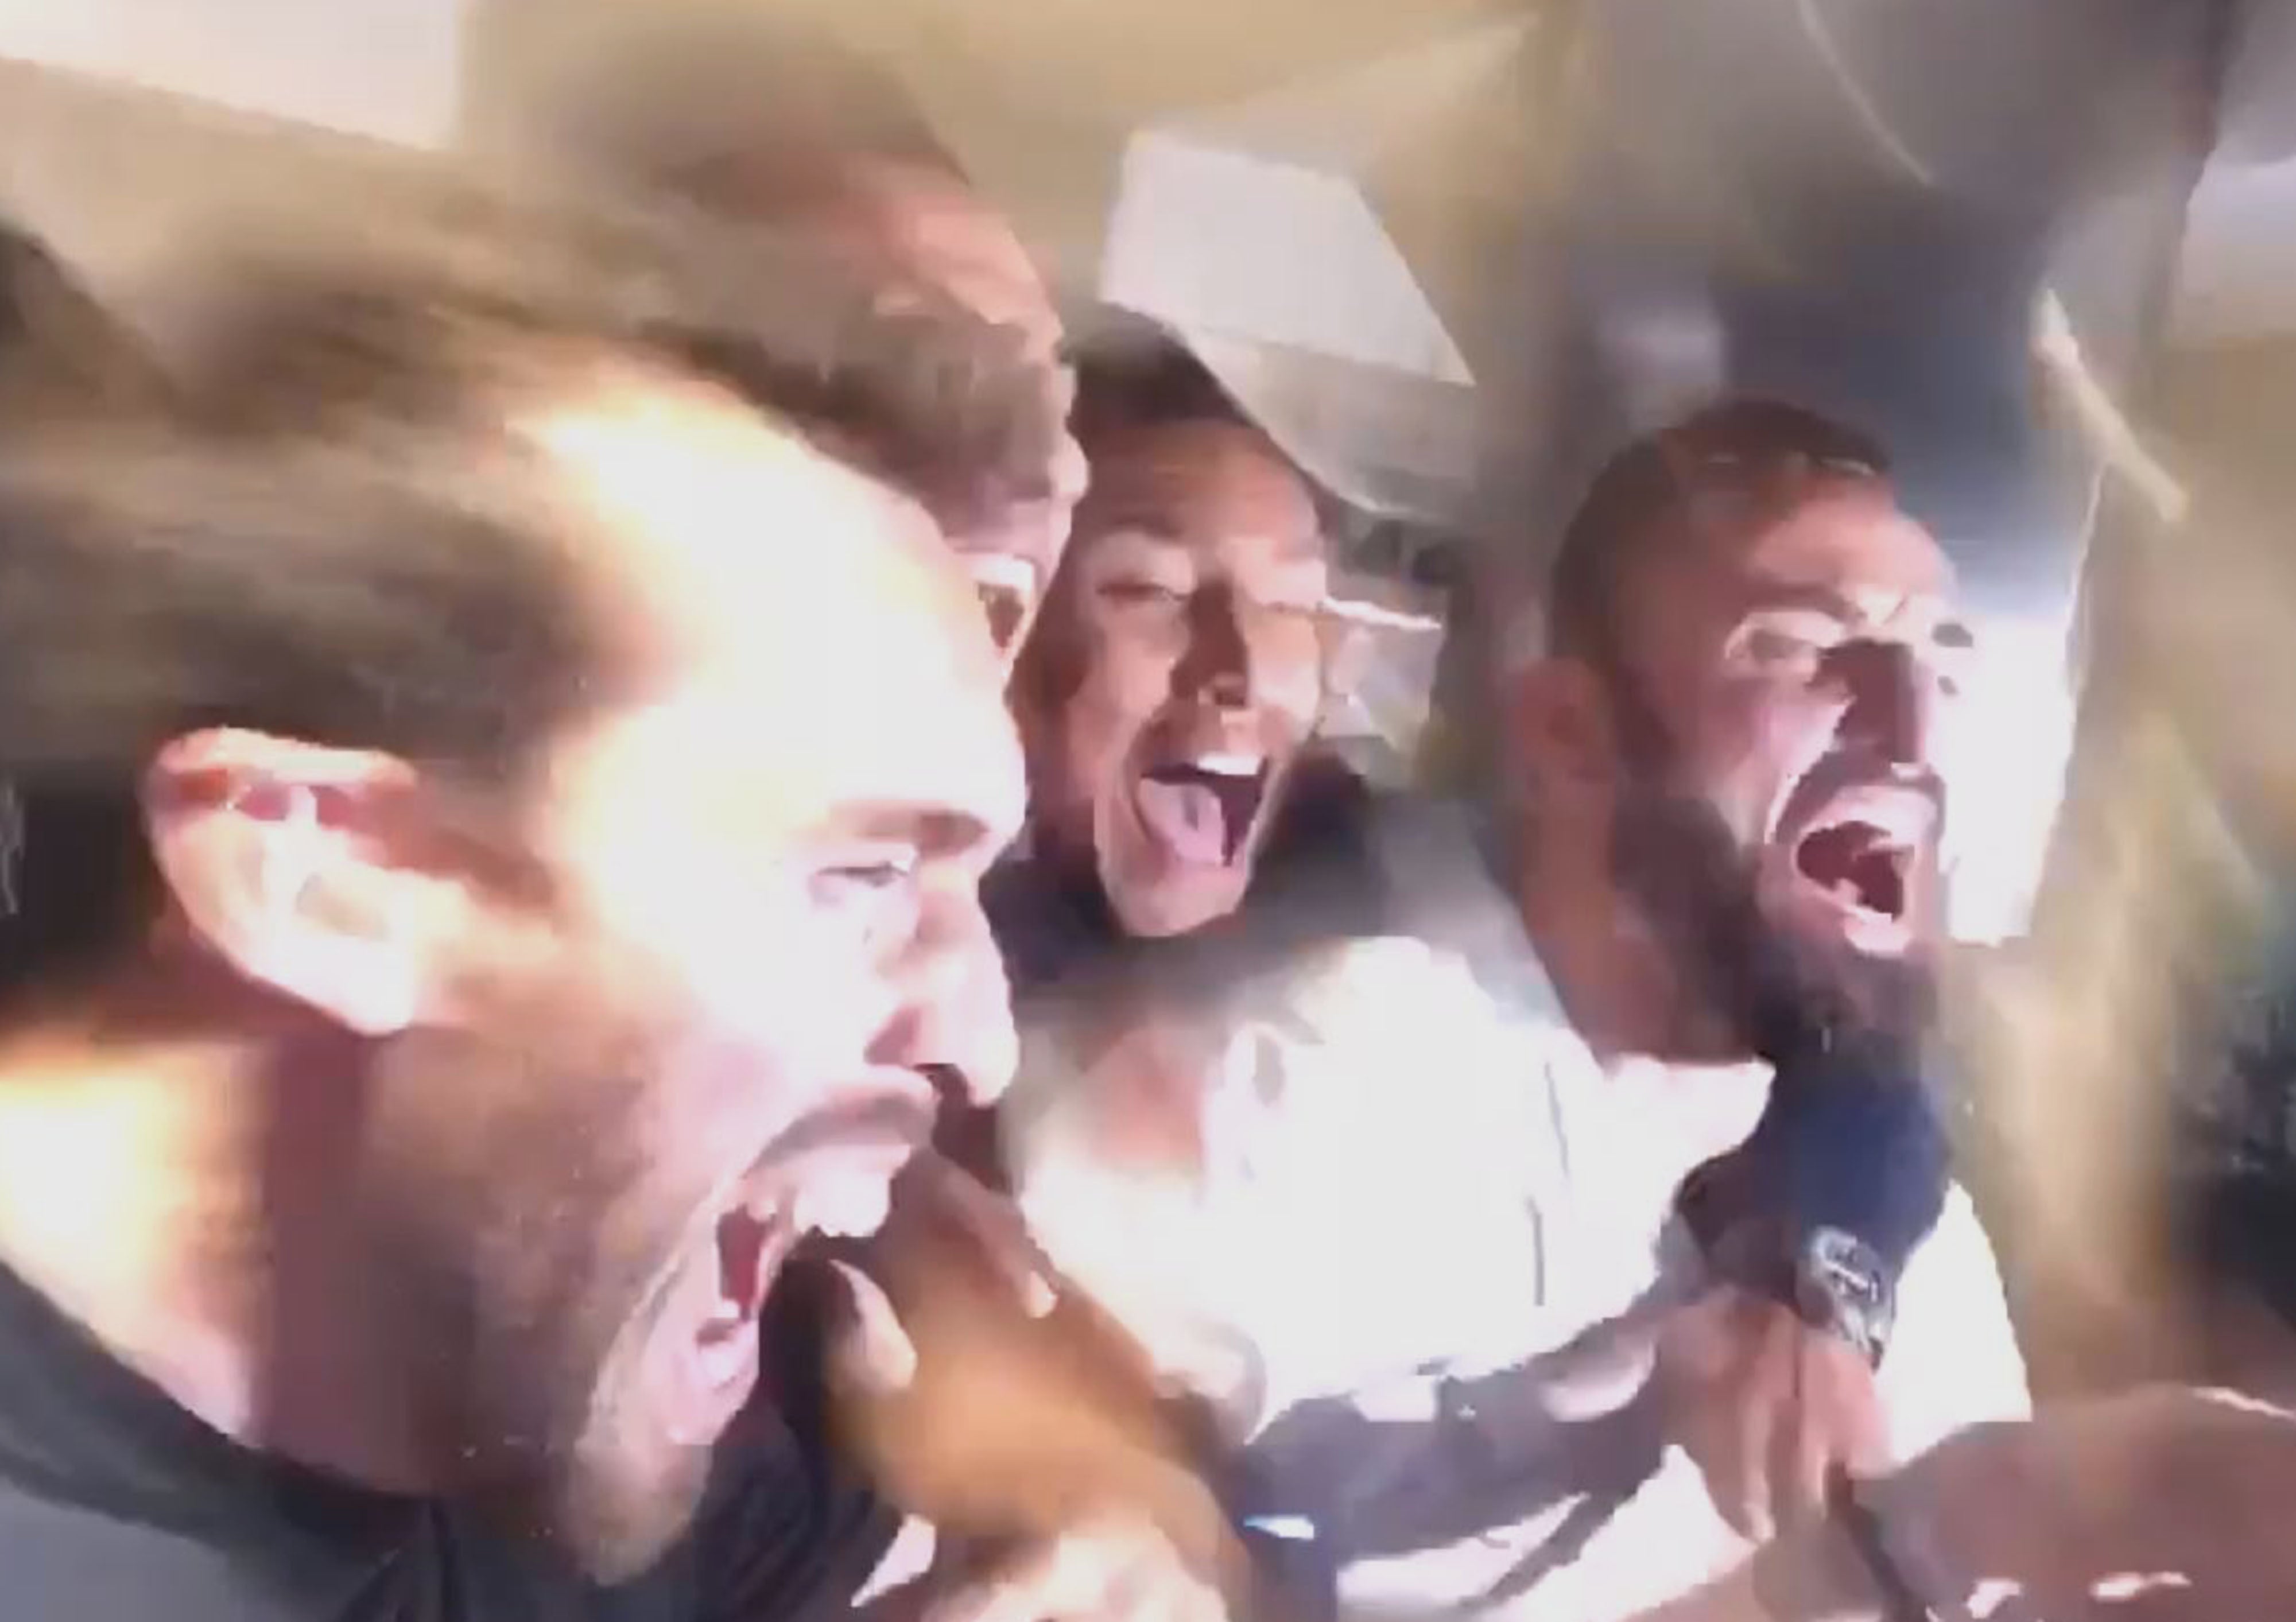 Handout video grab taken from the Twitter feed of Christian Fuchs @FuchsOfficial of Leicester players at Jamie Vardy’s house in Melton Mowbray reacting to wining the Premier League (@FuchsOfficial/Twitter)